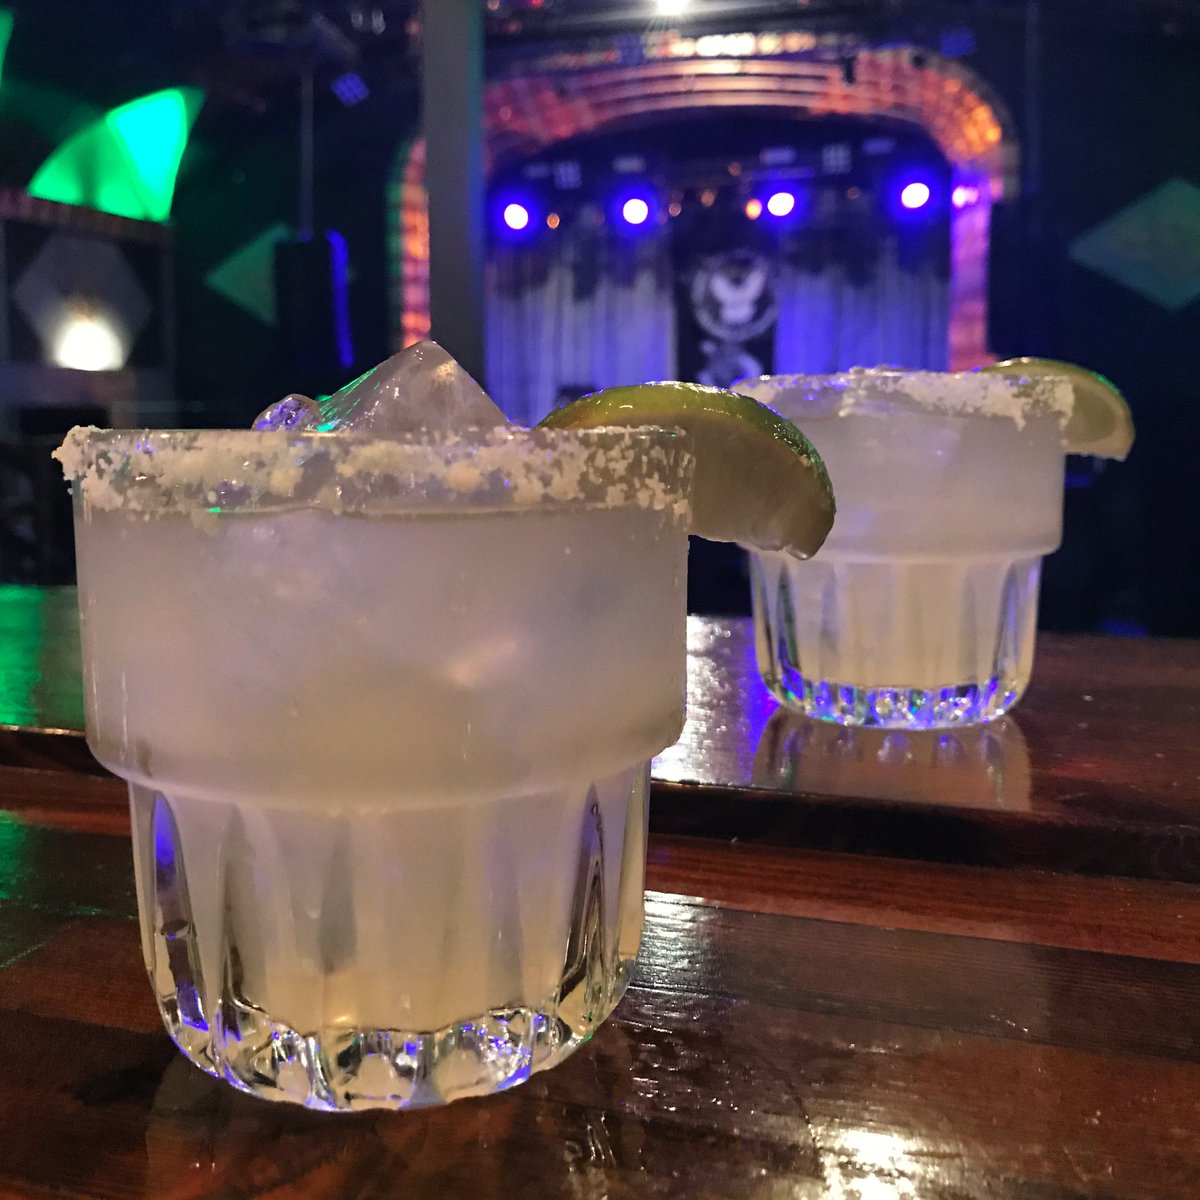 THAT MARGARITA LIFE!!! #margaritatuesday #dtla #lovesongbar happy hour from 4-7pm and half off small bites.